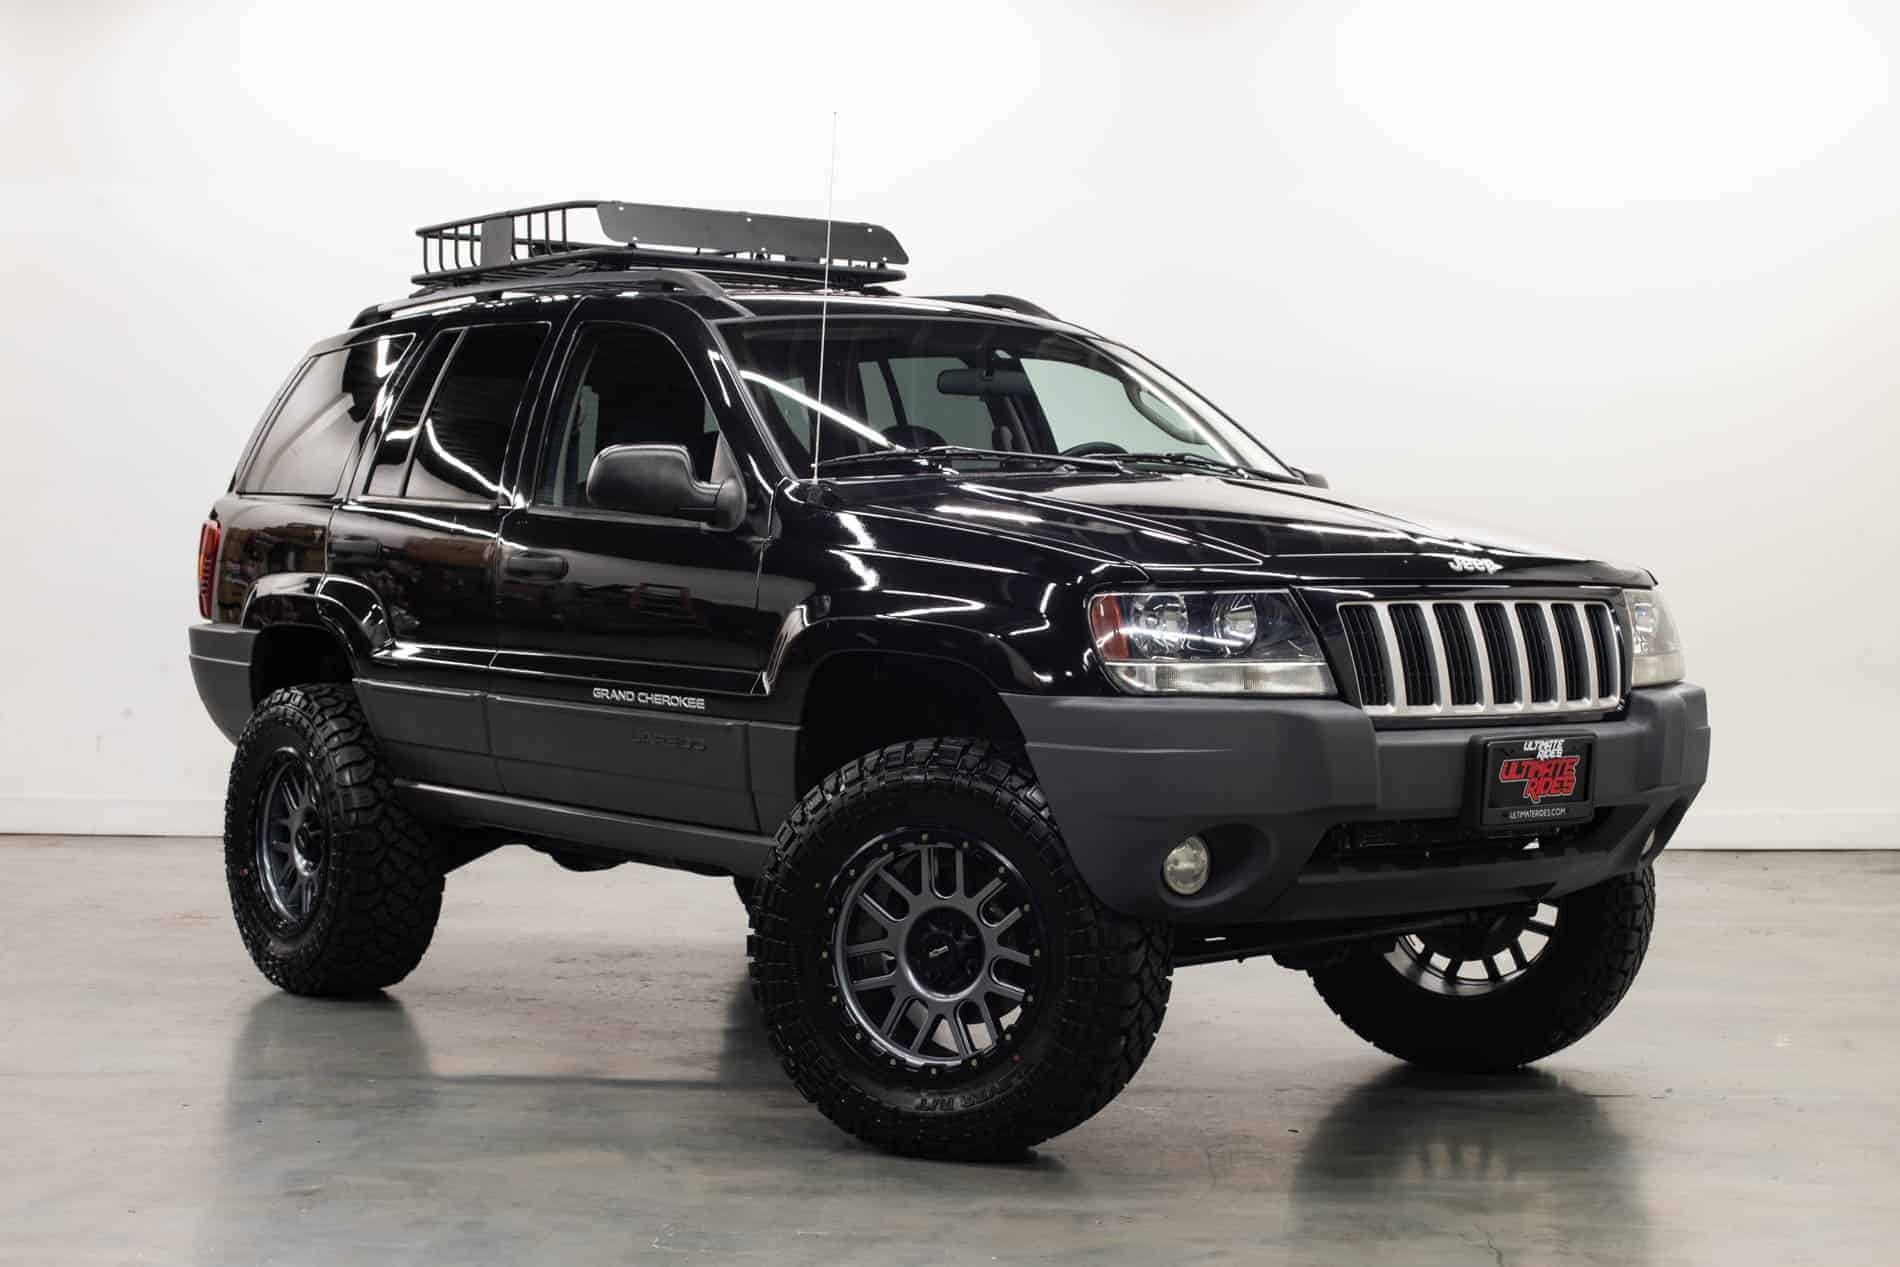 Best Off Road SUV